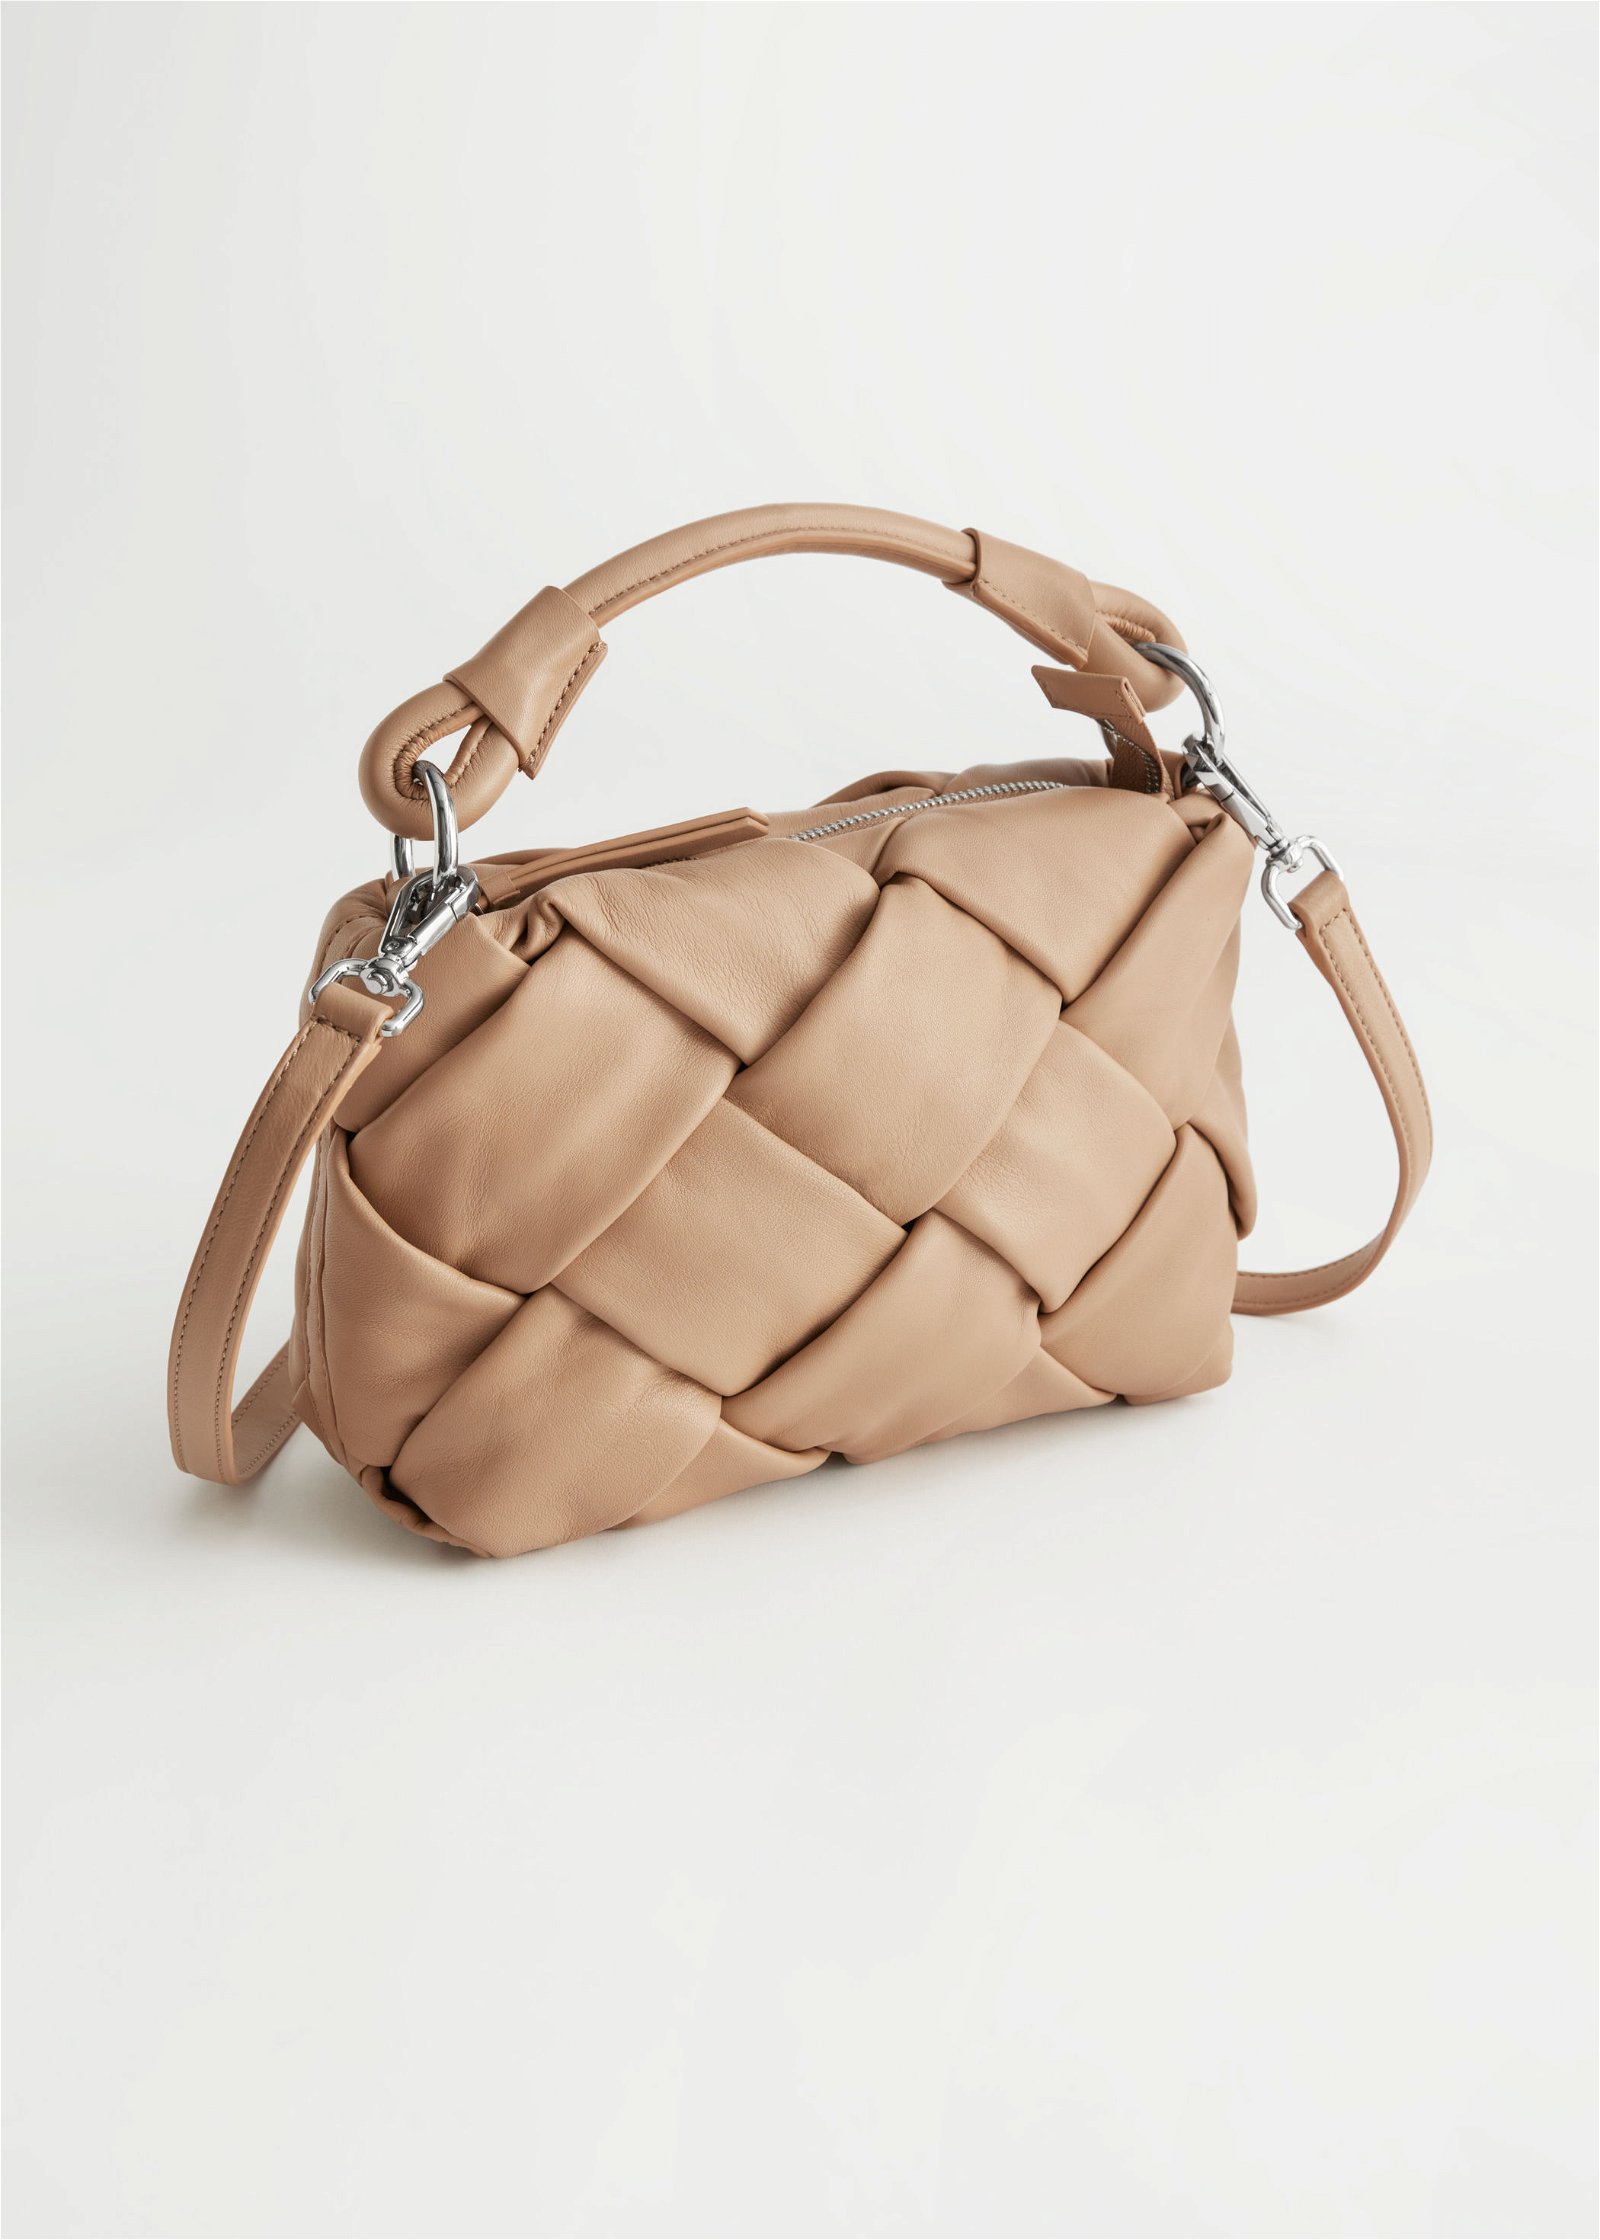  OTHER STORIES Braided Leather Crossbody Bag